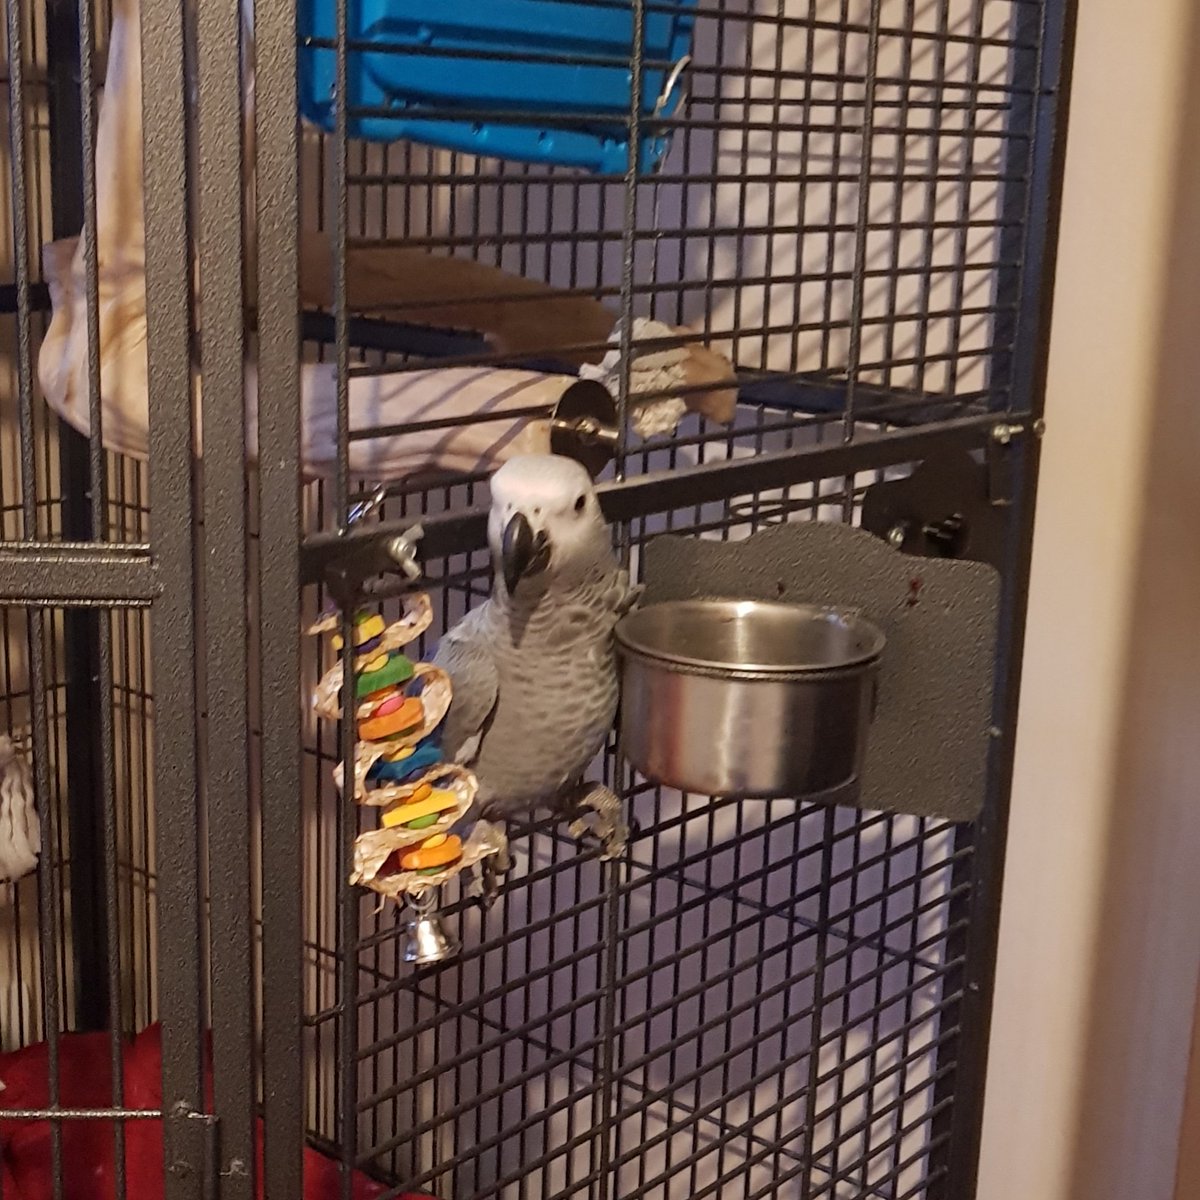 Errrm we have an escape artist already at 5 months old  😂😂😂 #mumble82 #escapee #escapeartist #trouble #africangreyparrots #congogrey #parrotproblems #cleverparrot #cleverbird #africangreysoftwitter  #parrotsoftwitter #5monthsold